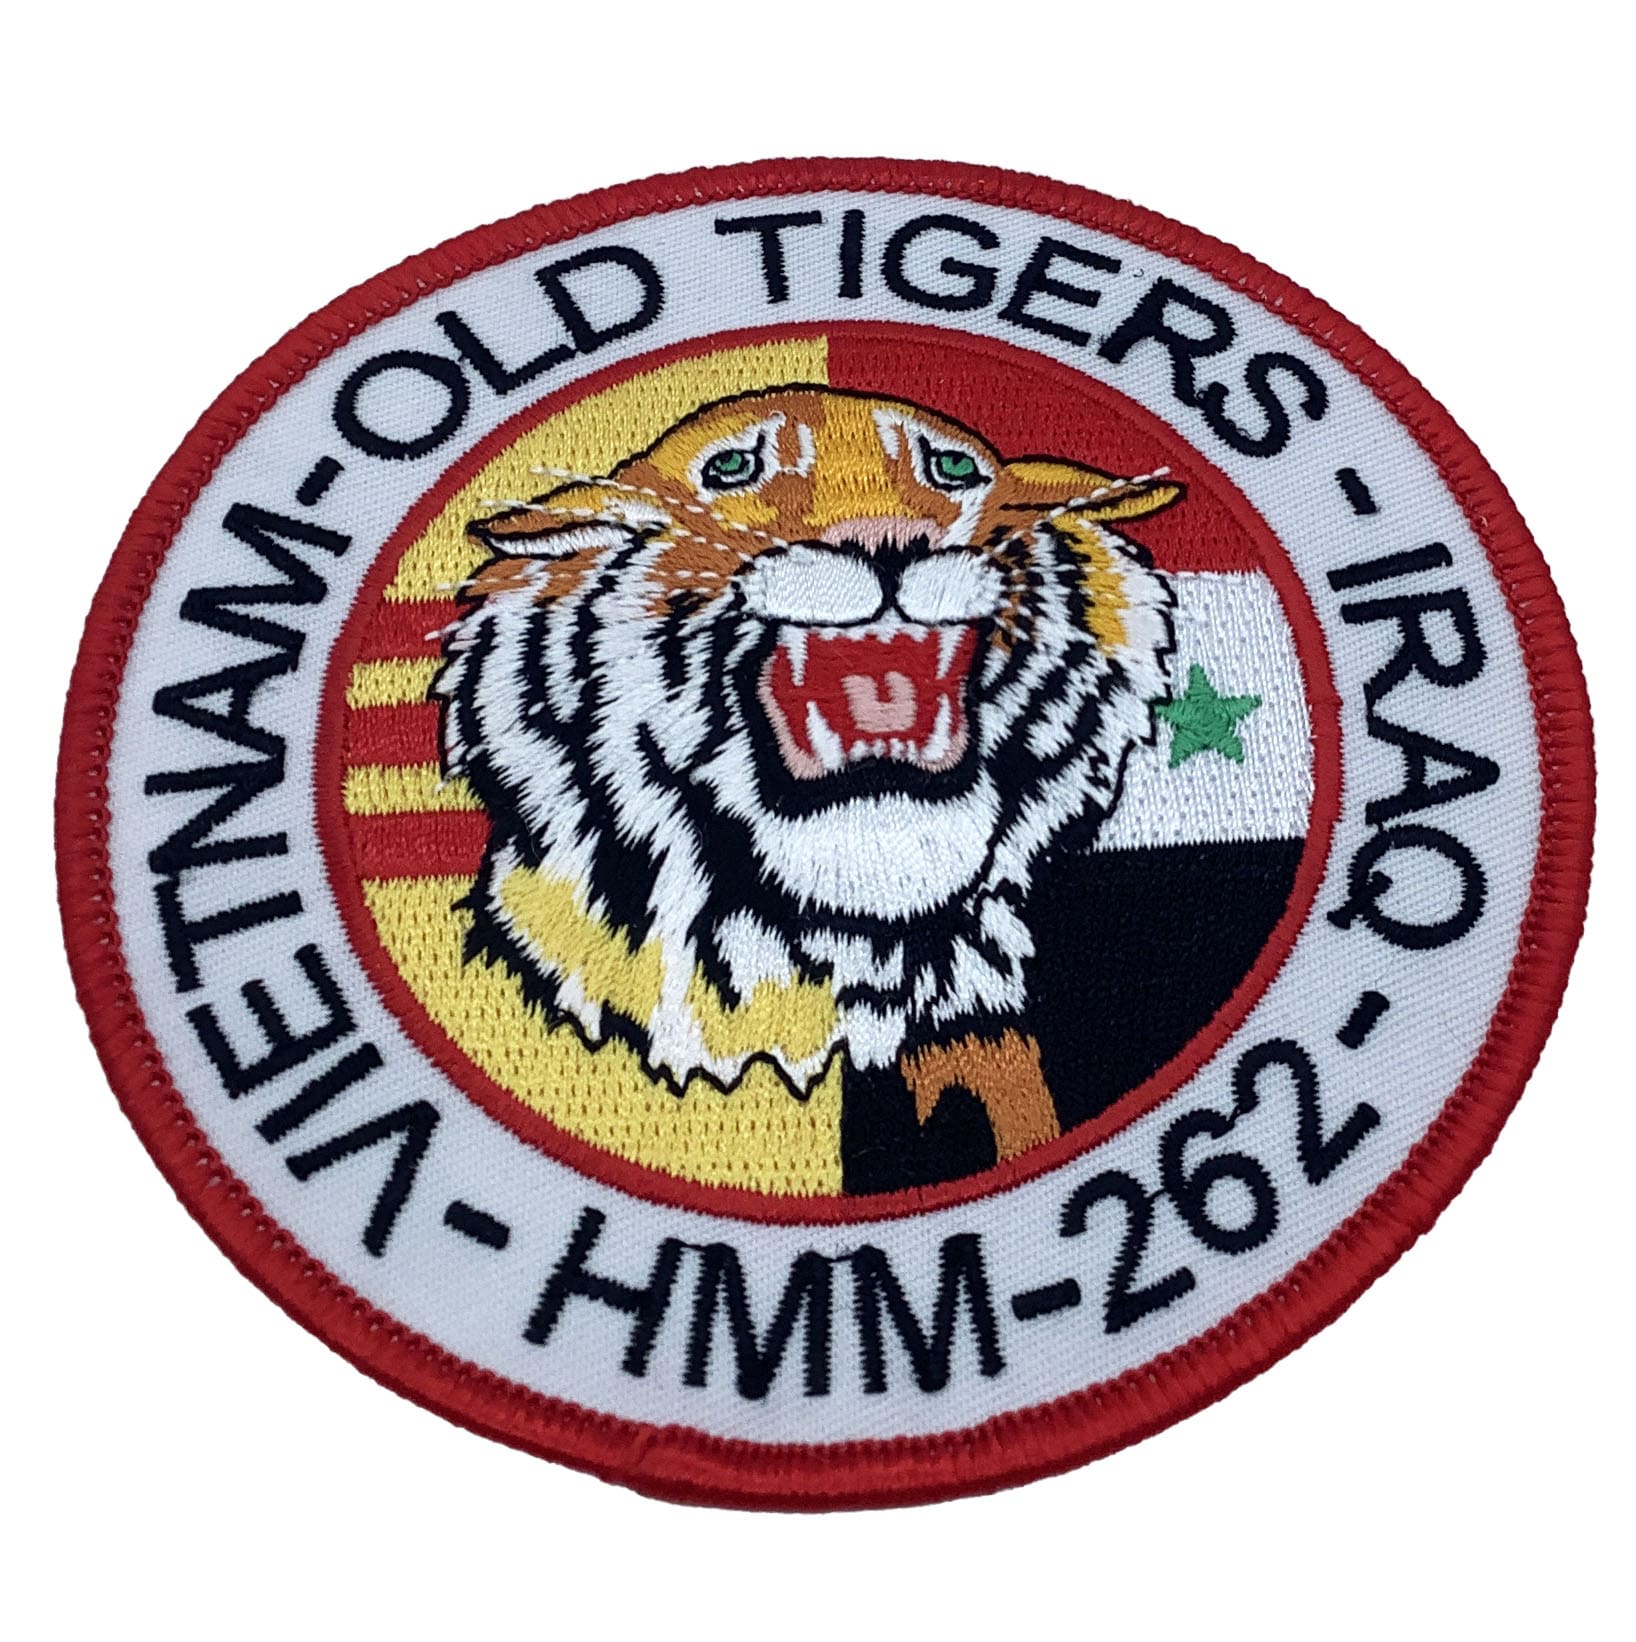 HMM 262 Old Tigers Squadron Patch- Plastic Backing/Sew On, 4